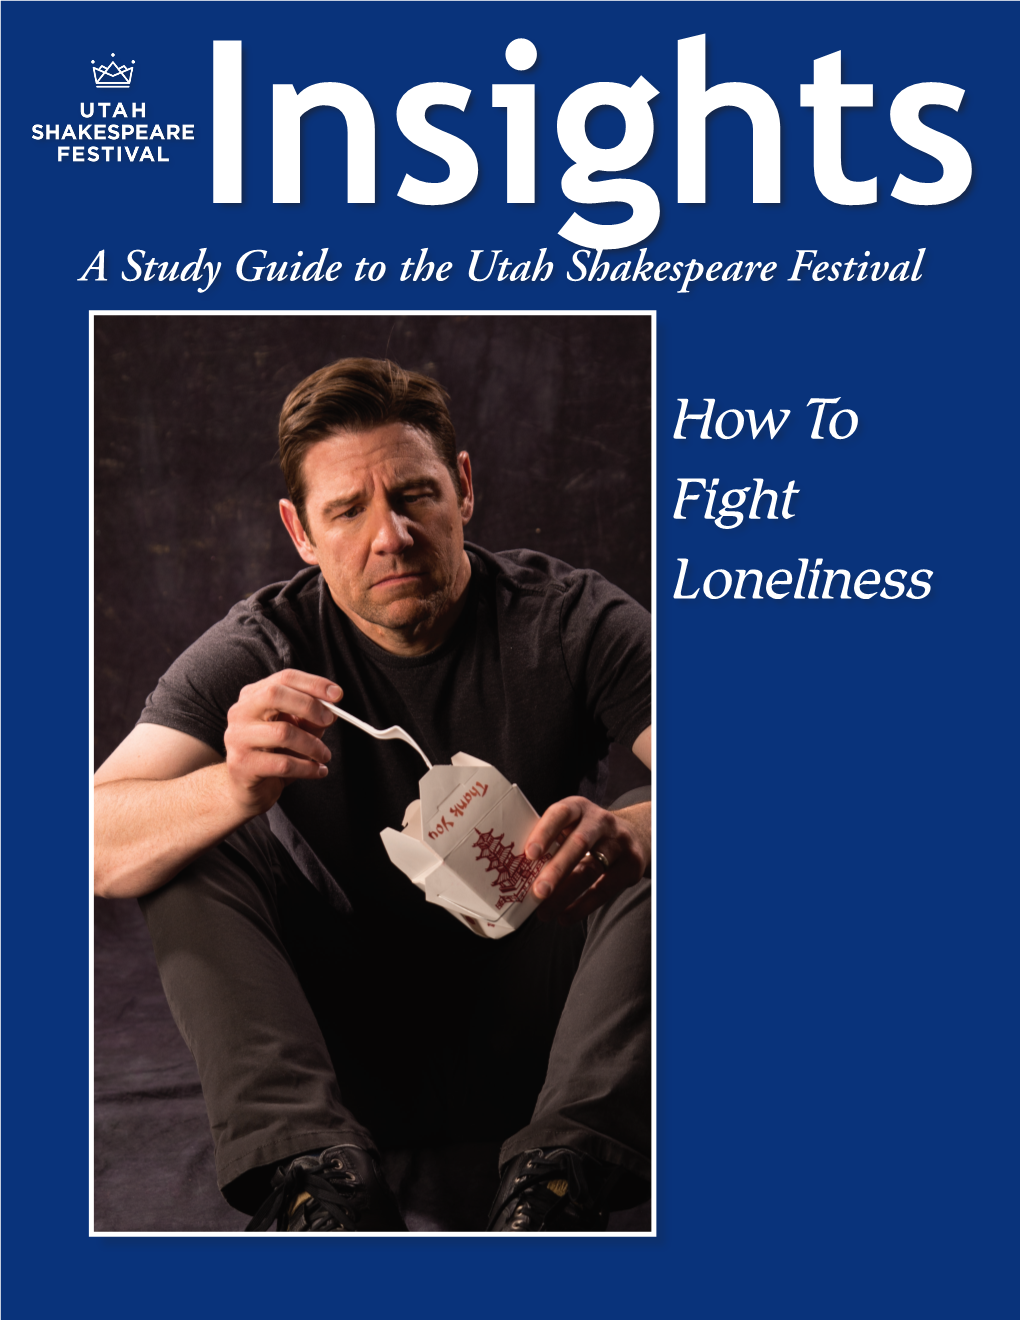 How to Fight Loneliness the Articles in This Study Guide Are Not Meant to Mirror Or Interpret Any Productions at the Utah Shakespeare Festival